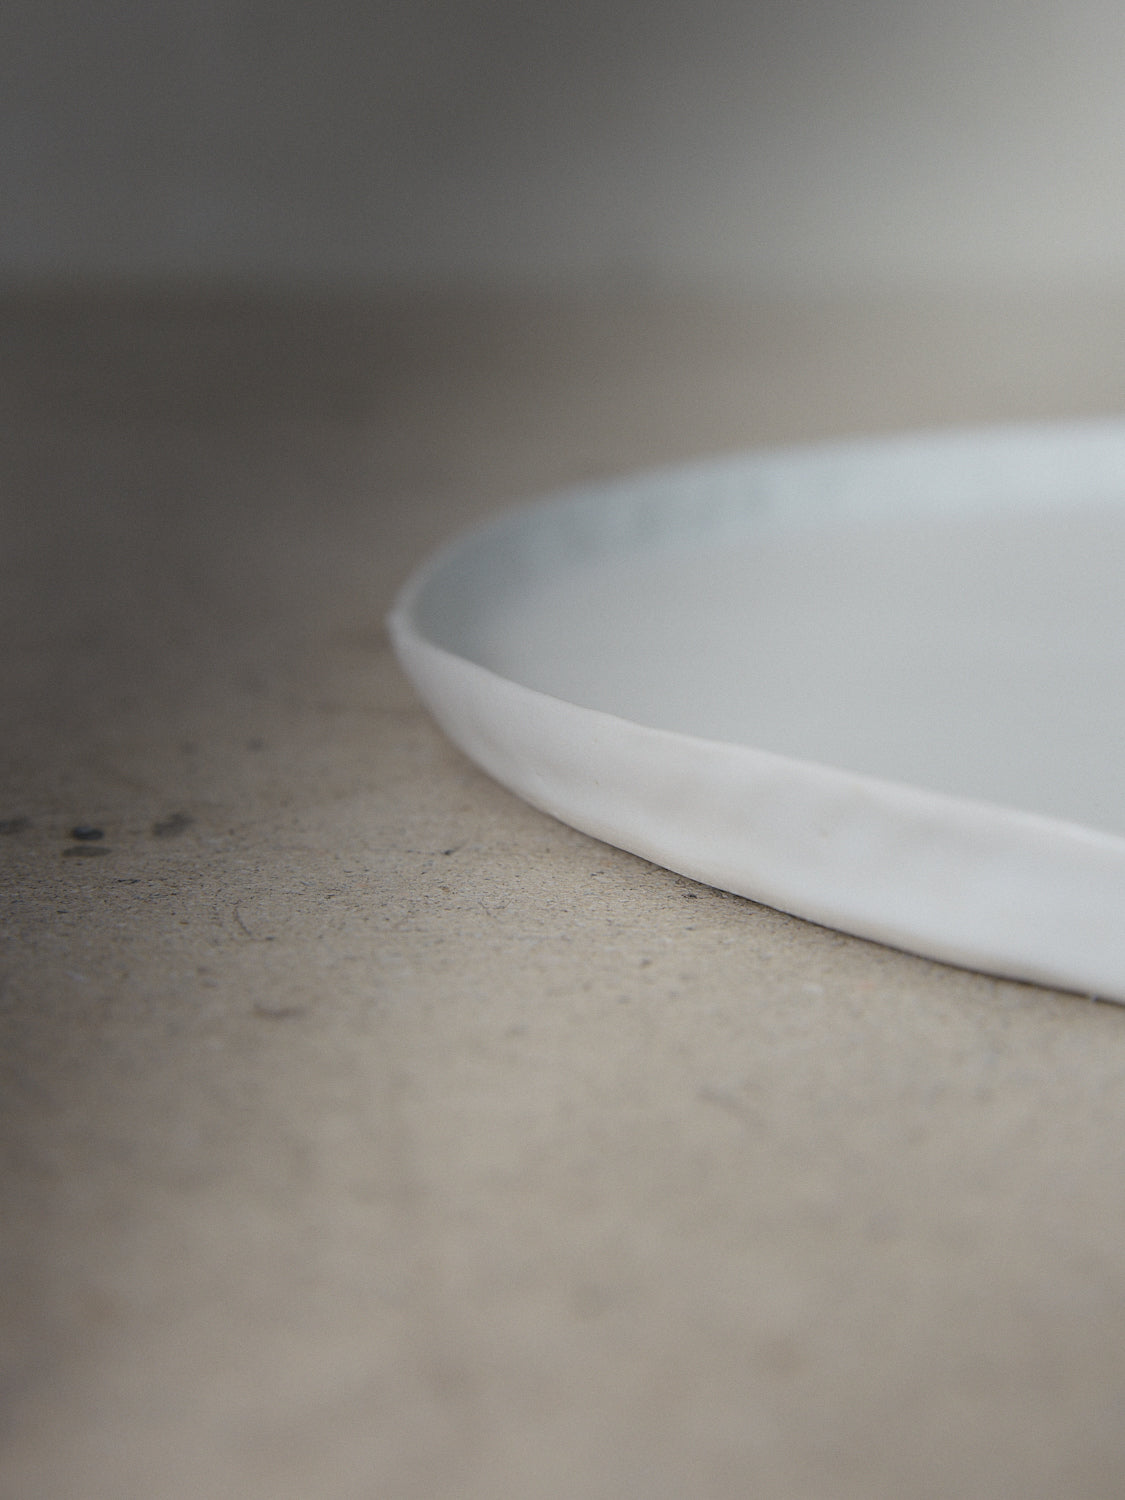 Raw Salad Plate in Ecru. A hand-formed stoneware salad plate recalling the natural world with perfectly imperfect edges in a classic matte white finish.